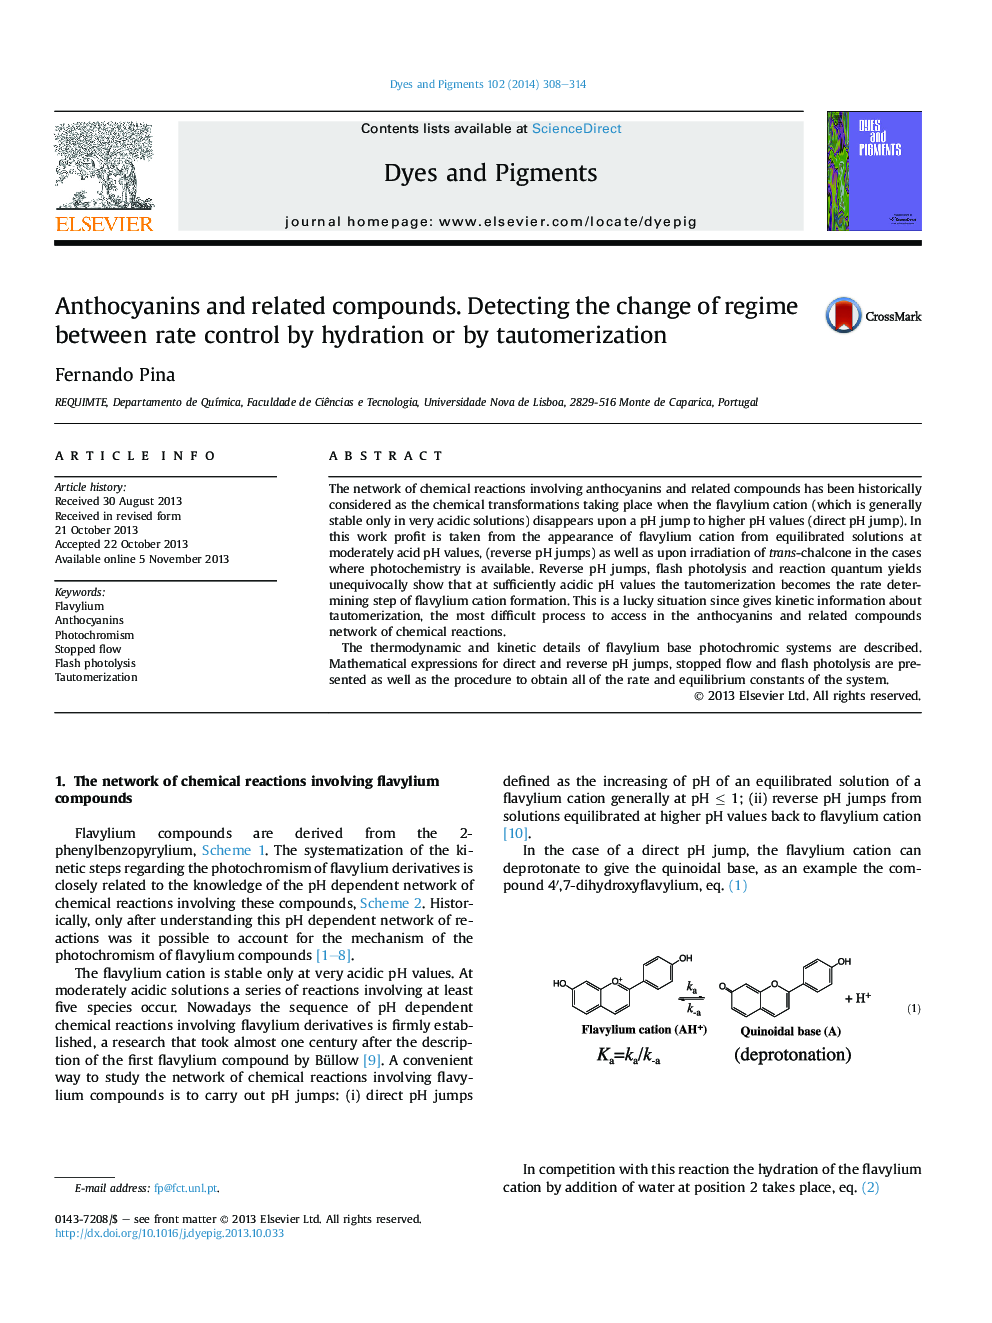 Anthocyanins and related compounds. Detecting the change of regime between rate control by hydration or by tautomerization